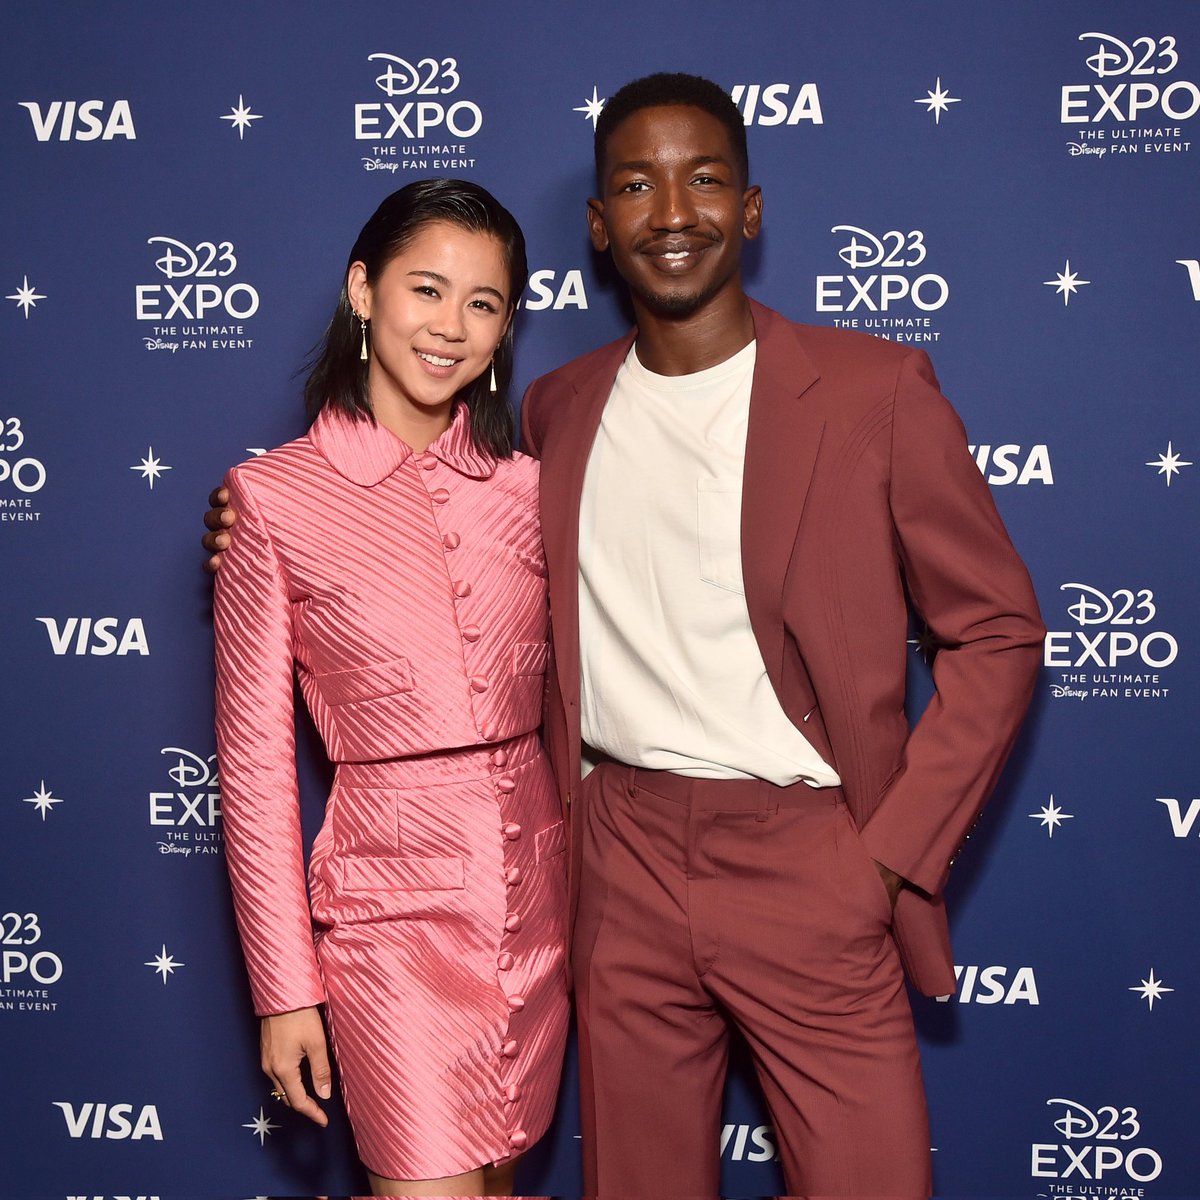 One of the many reasons why I love #Elemental so much is the fact that Ember and Wade are voiced by an Asian woman and a Black man respectively. An interracial couple that doesn't involve a white person voicing leads in a Pixar movie is a first. We love to see it!